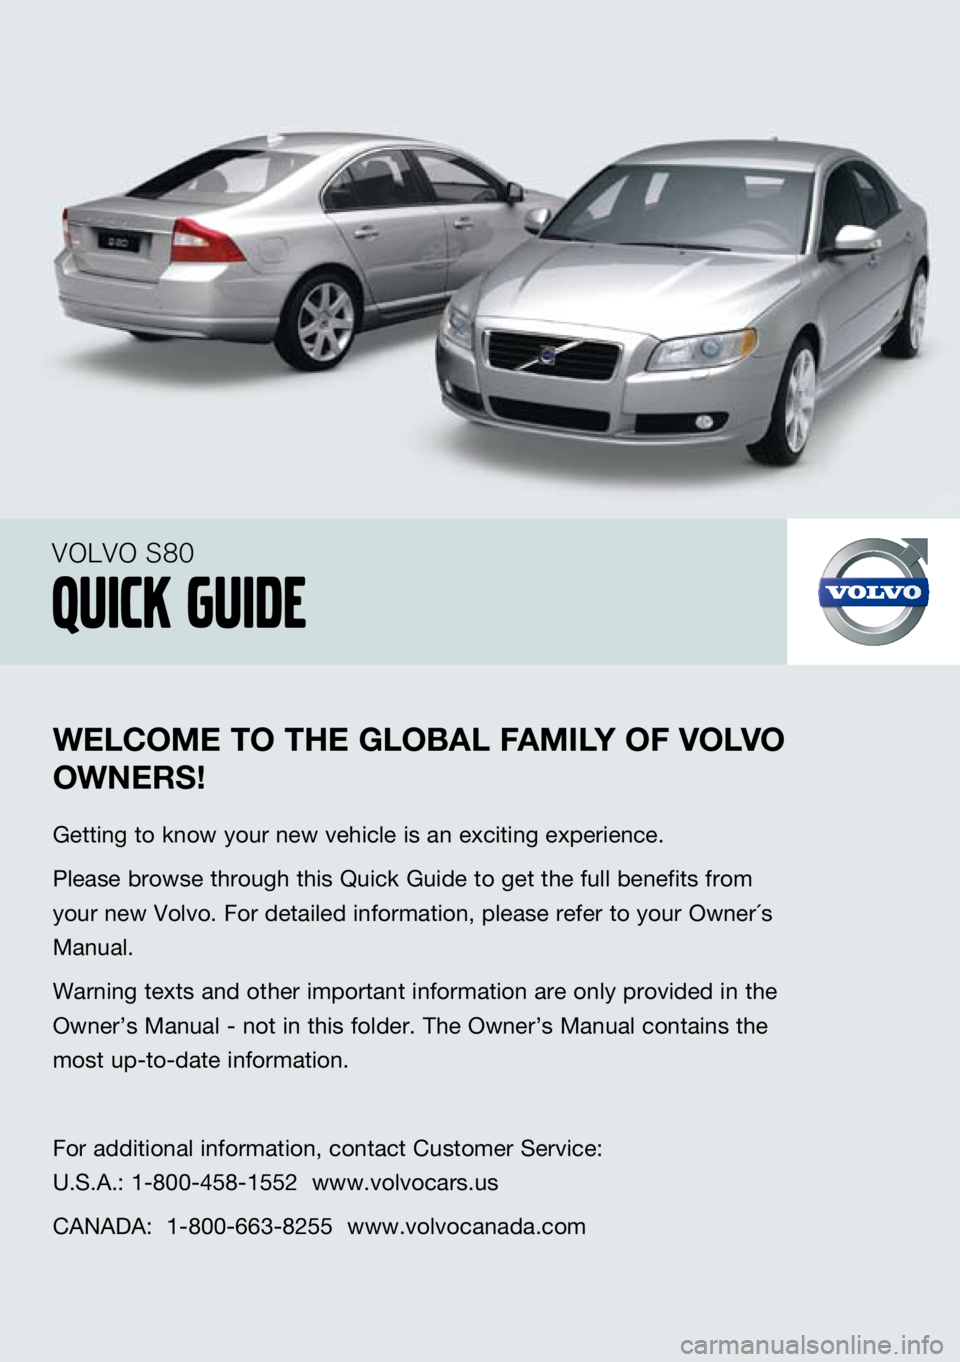 VOLVO S80 2009  Quick Guide 
wELCOME TO T hE  gLOBAL  fAM iLY O f vOL vO 
O w NER s!
Getting to know your new vehicle is an exciting experience.
Please browse through this Quick Guide to get the full benefits from 
your new Volv